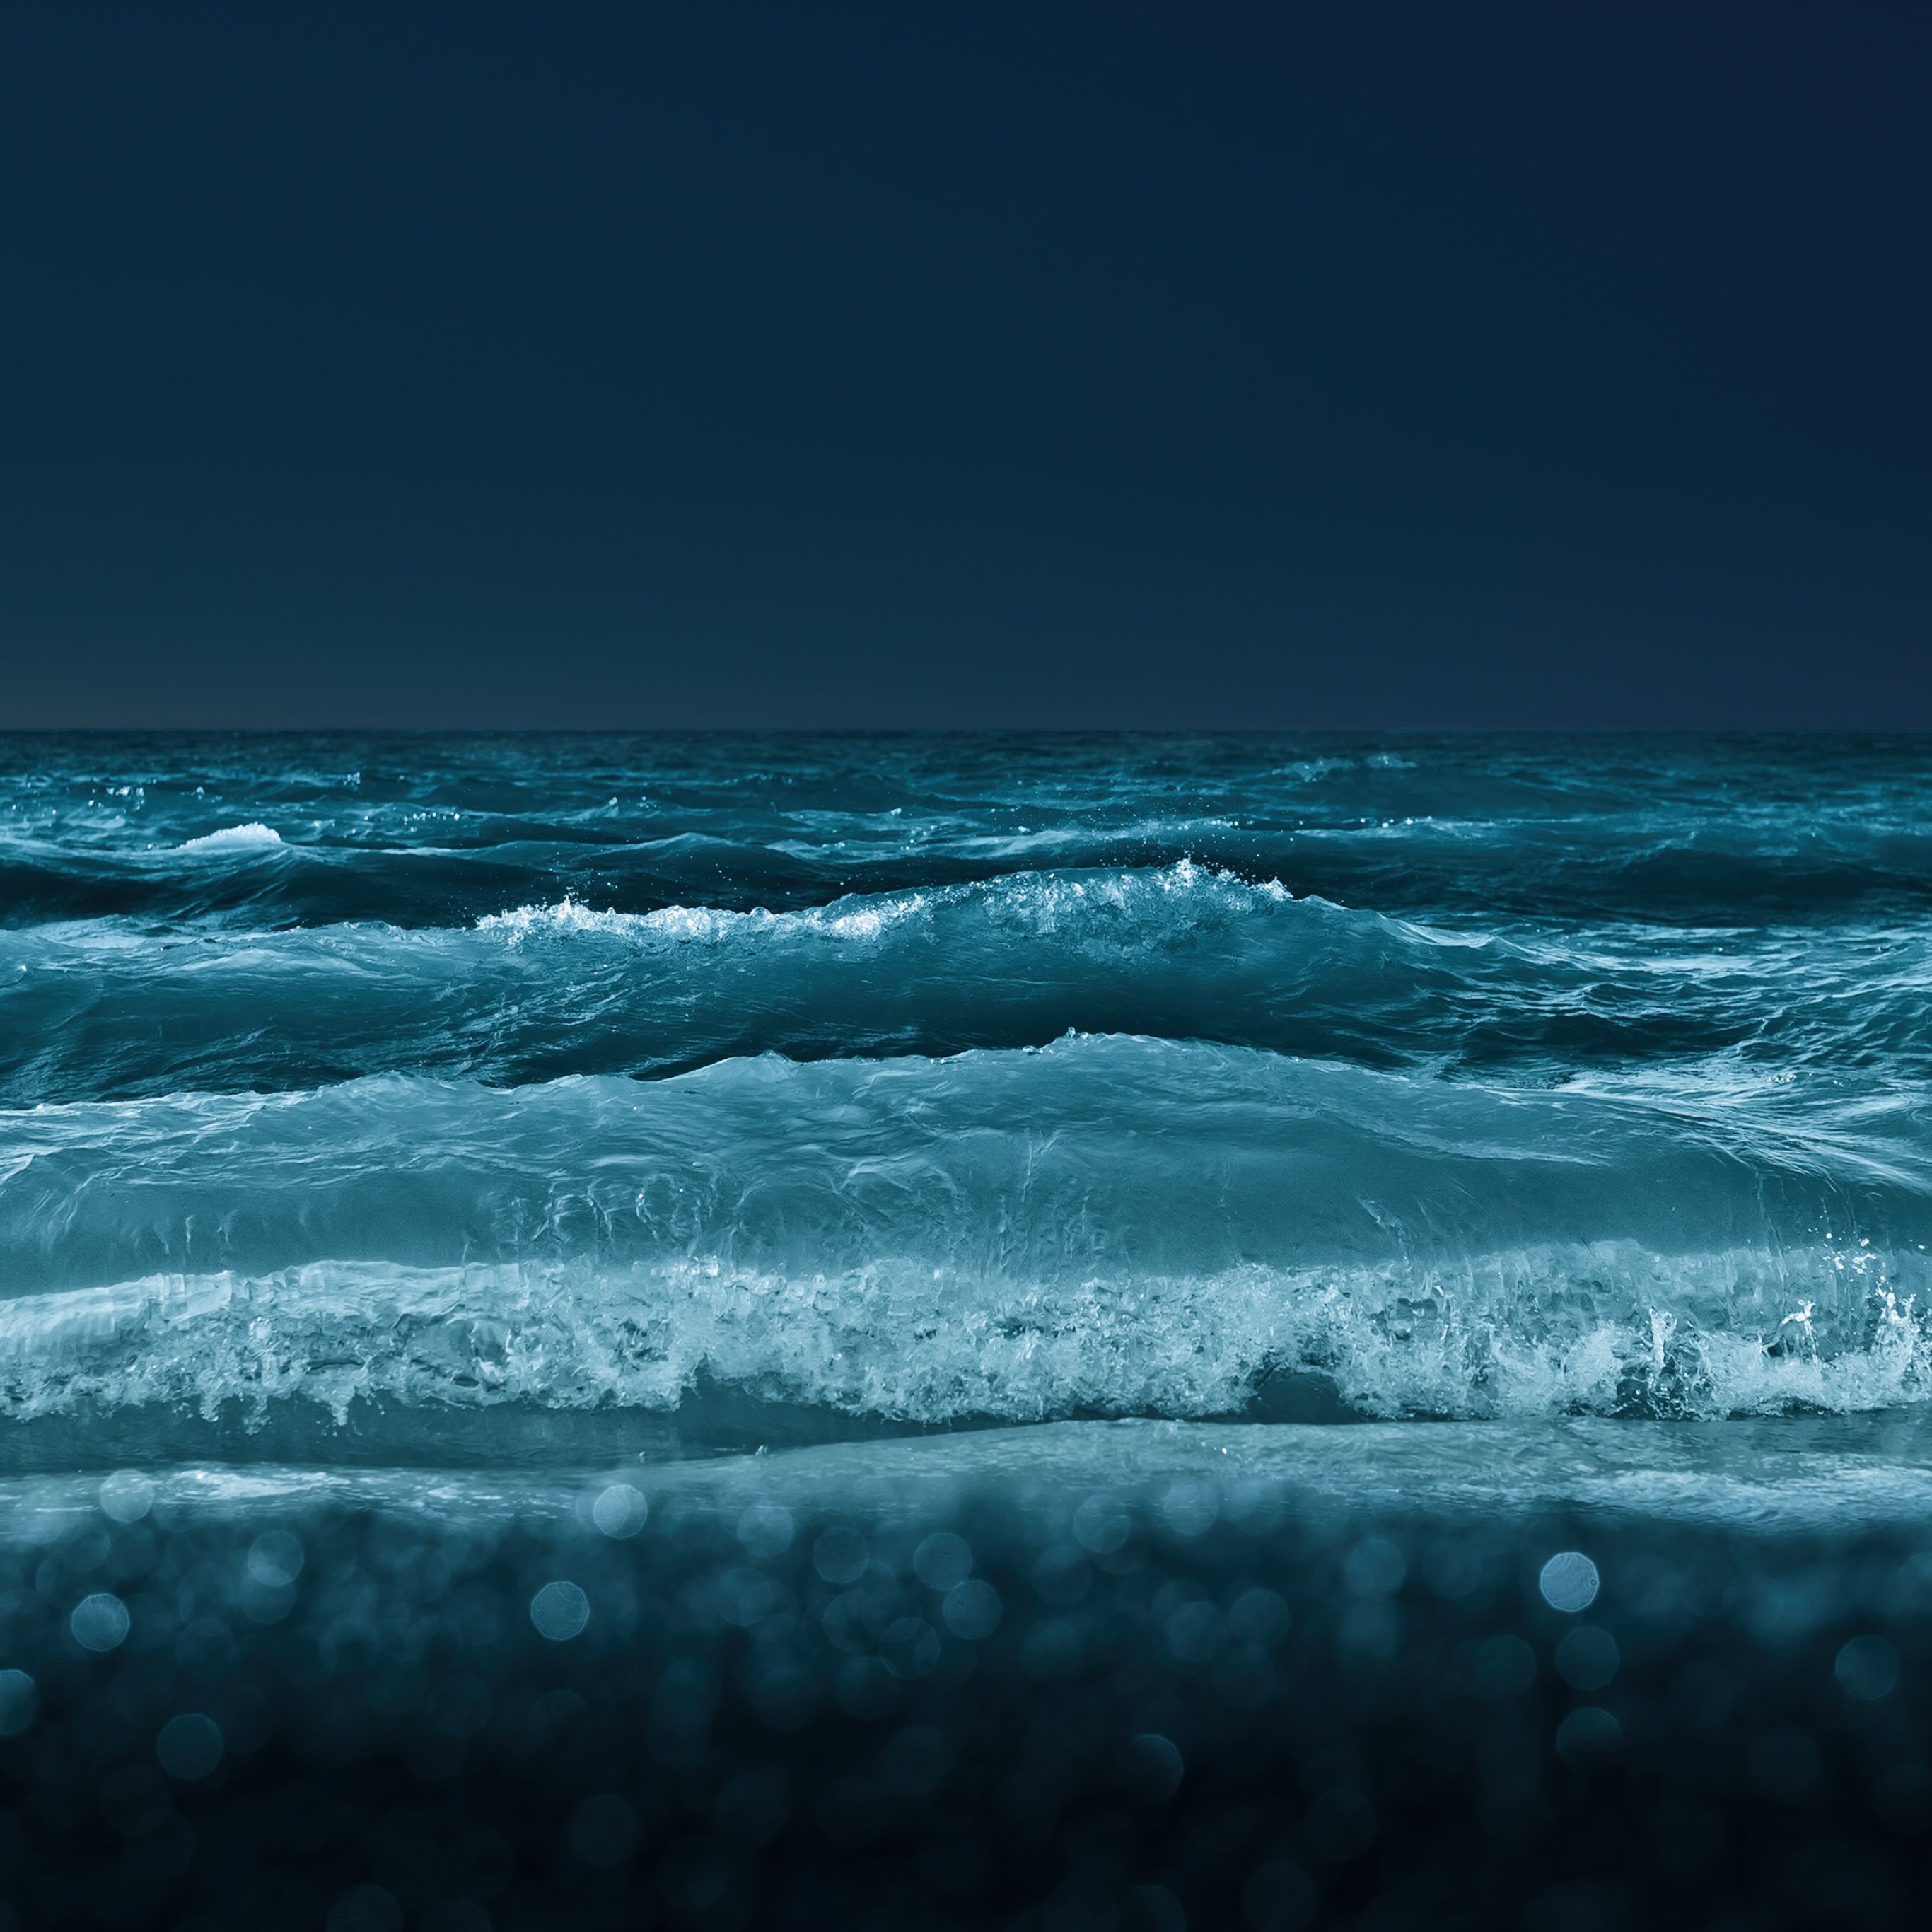 A deep blue ocean at night with a starry sky - Water, lake